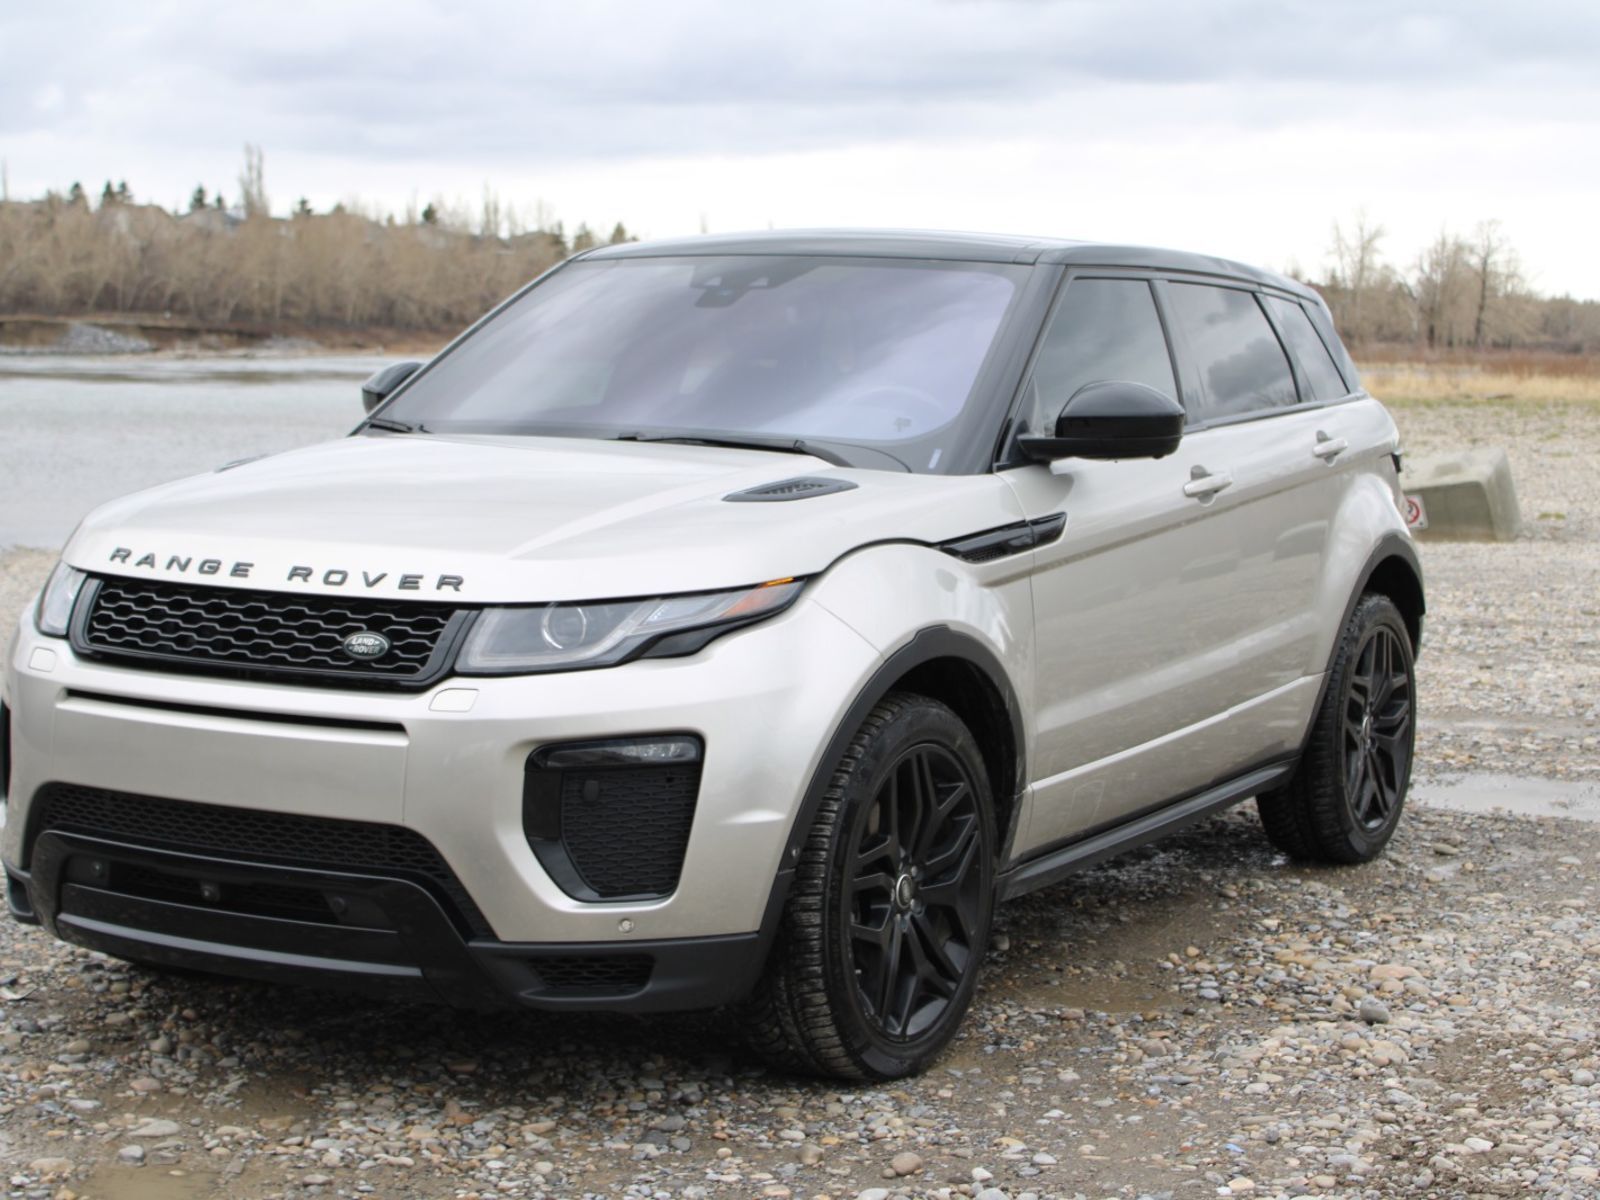 2017 Land Rover Range Rover Evoque - ONE OWNER - 5dr HB HSE Dynamic